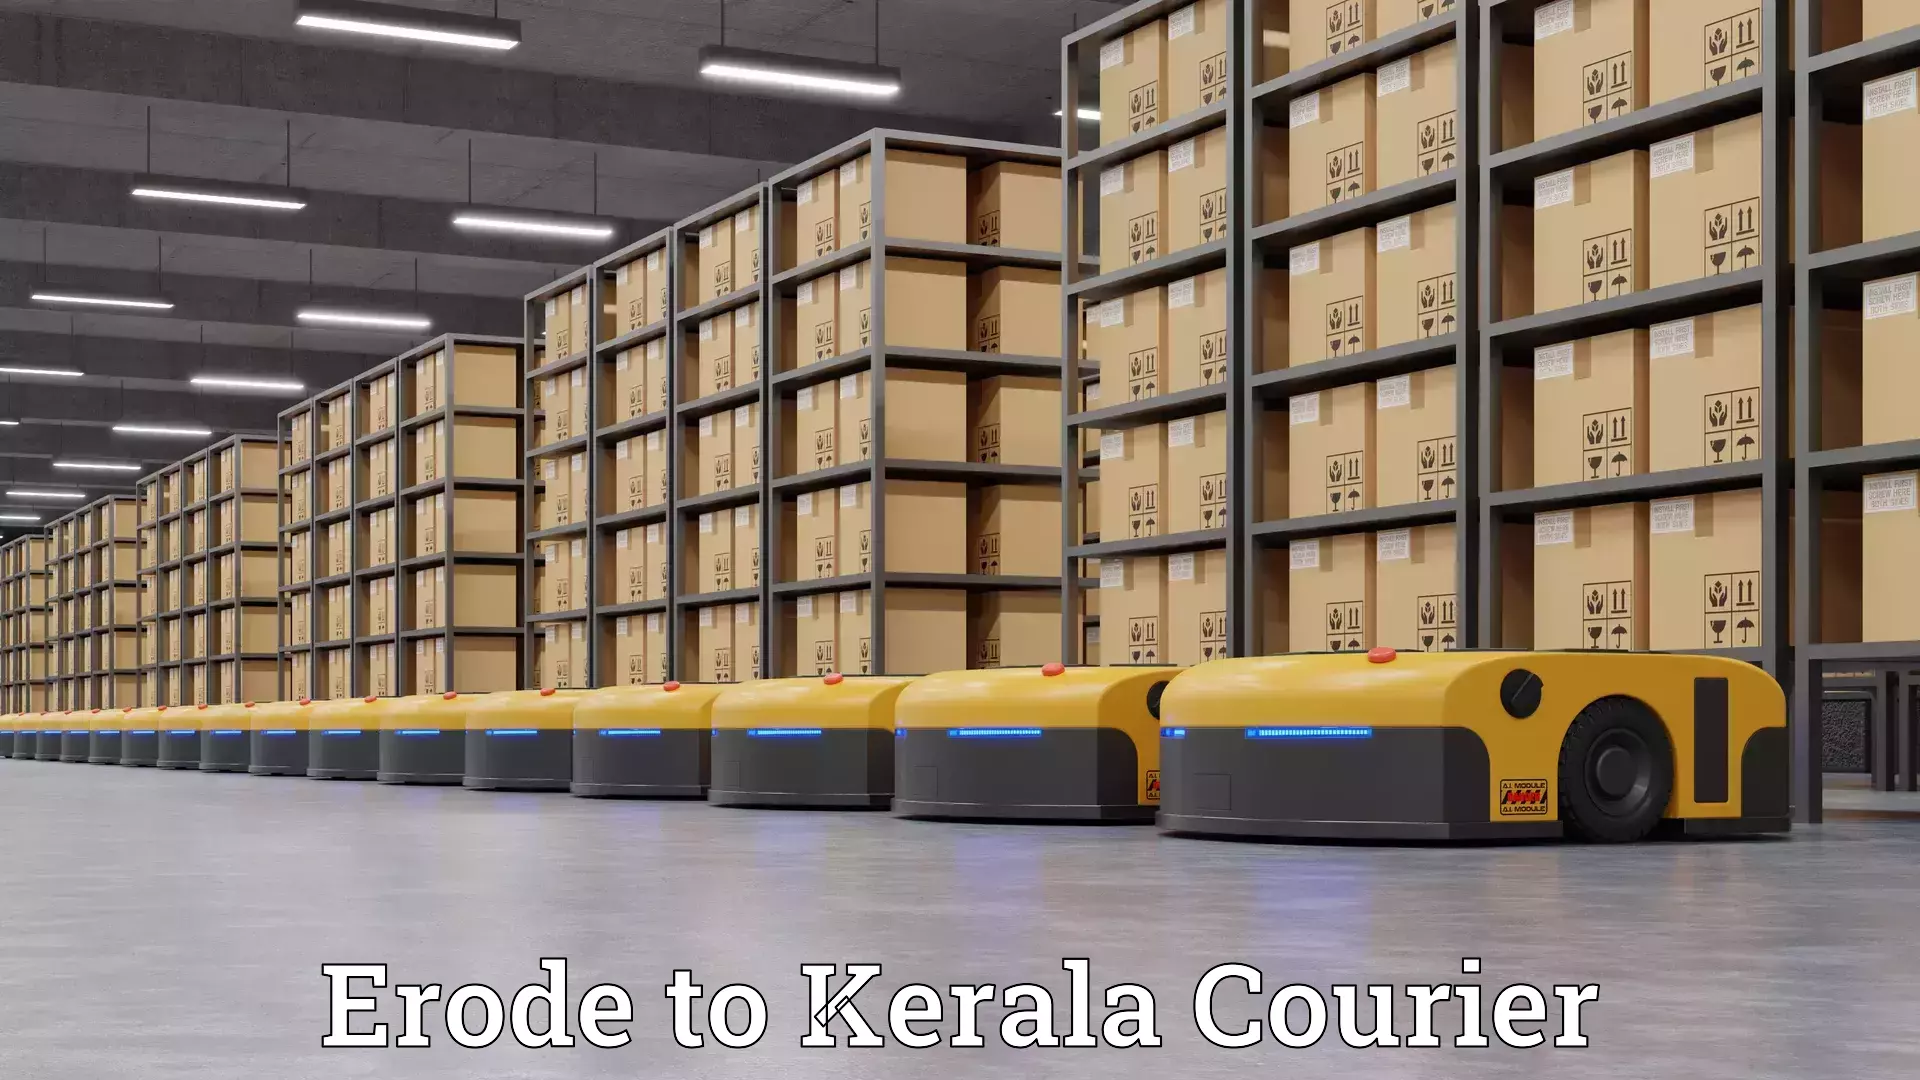 Trusted moving company Erode to Kerala